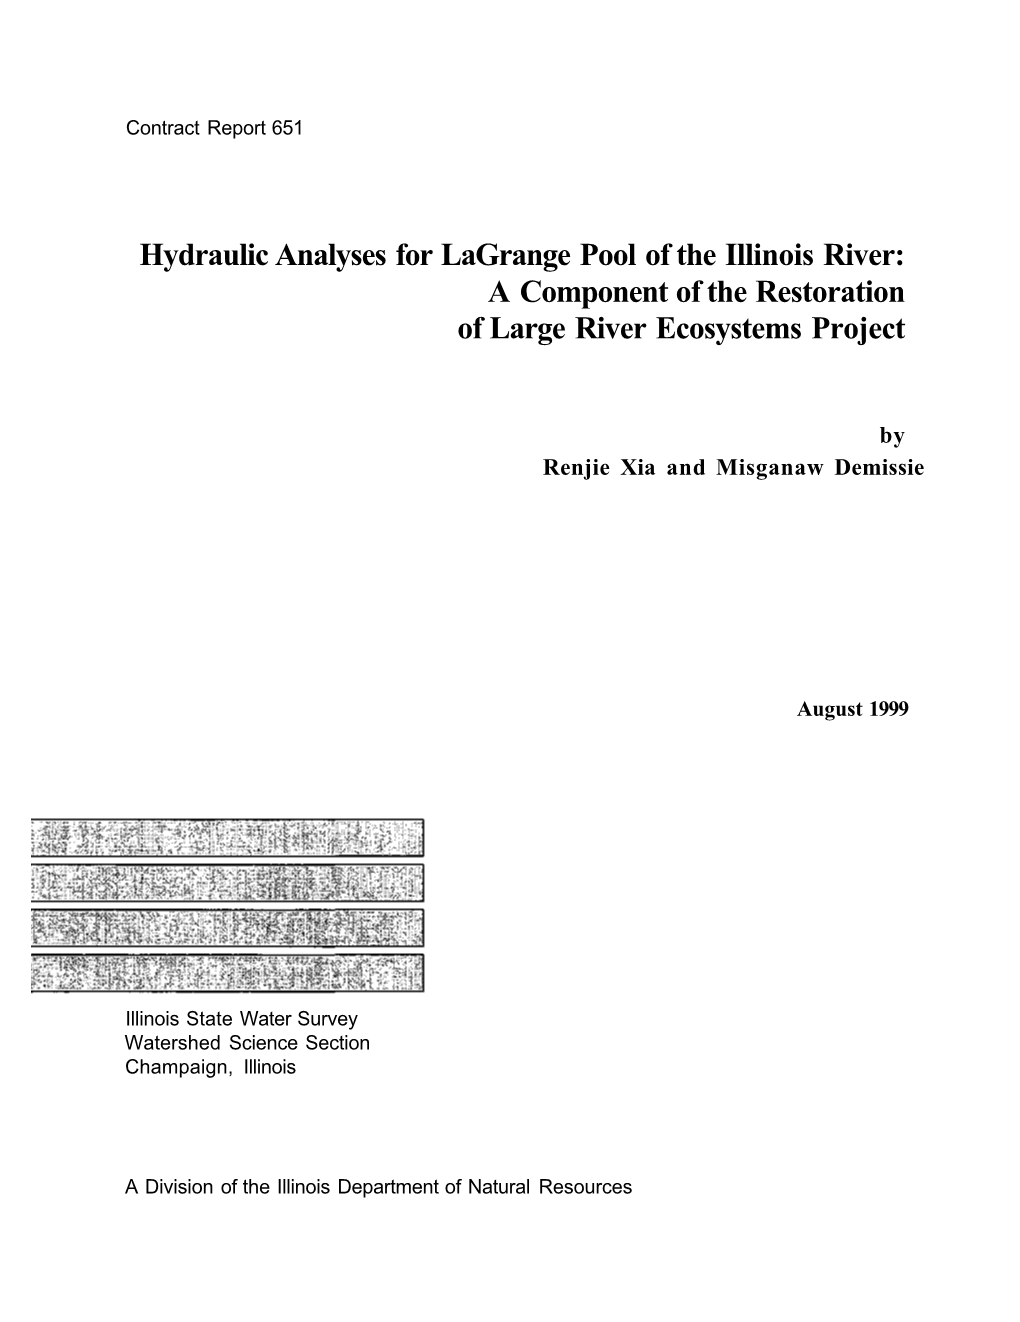 Hydraulic Analyses for Lagrange Pool of the Illinois River: a Component of the Restoration of Large River Ecosystems Project